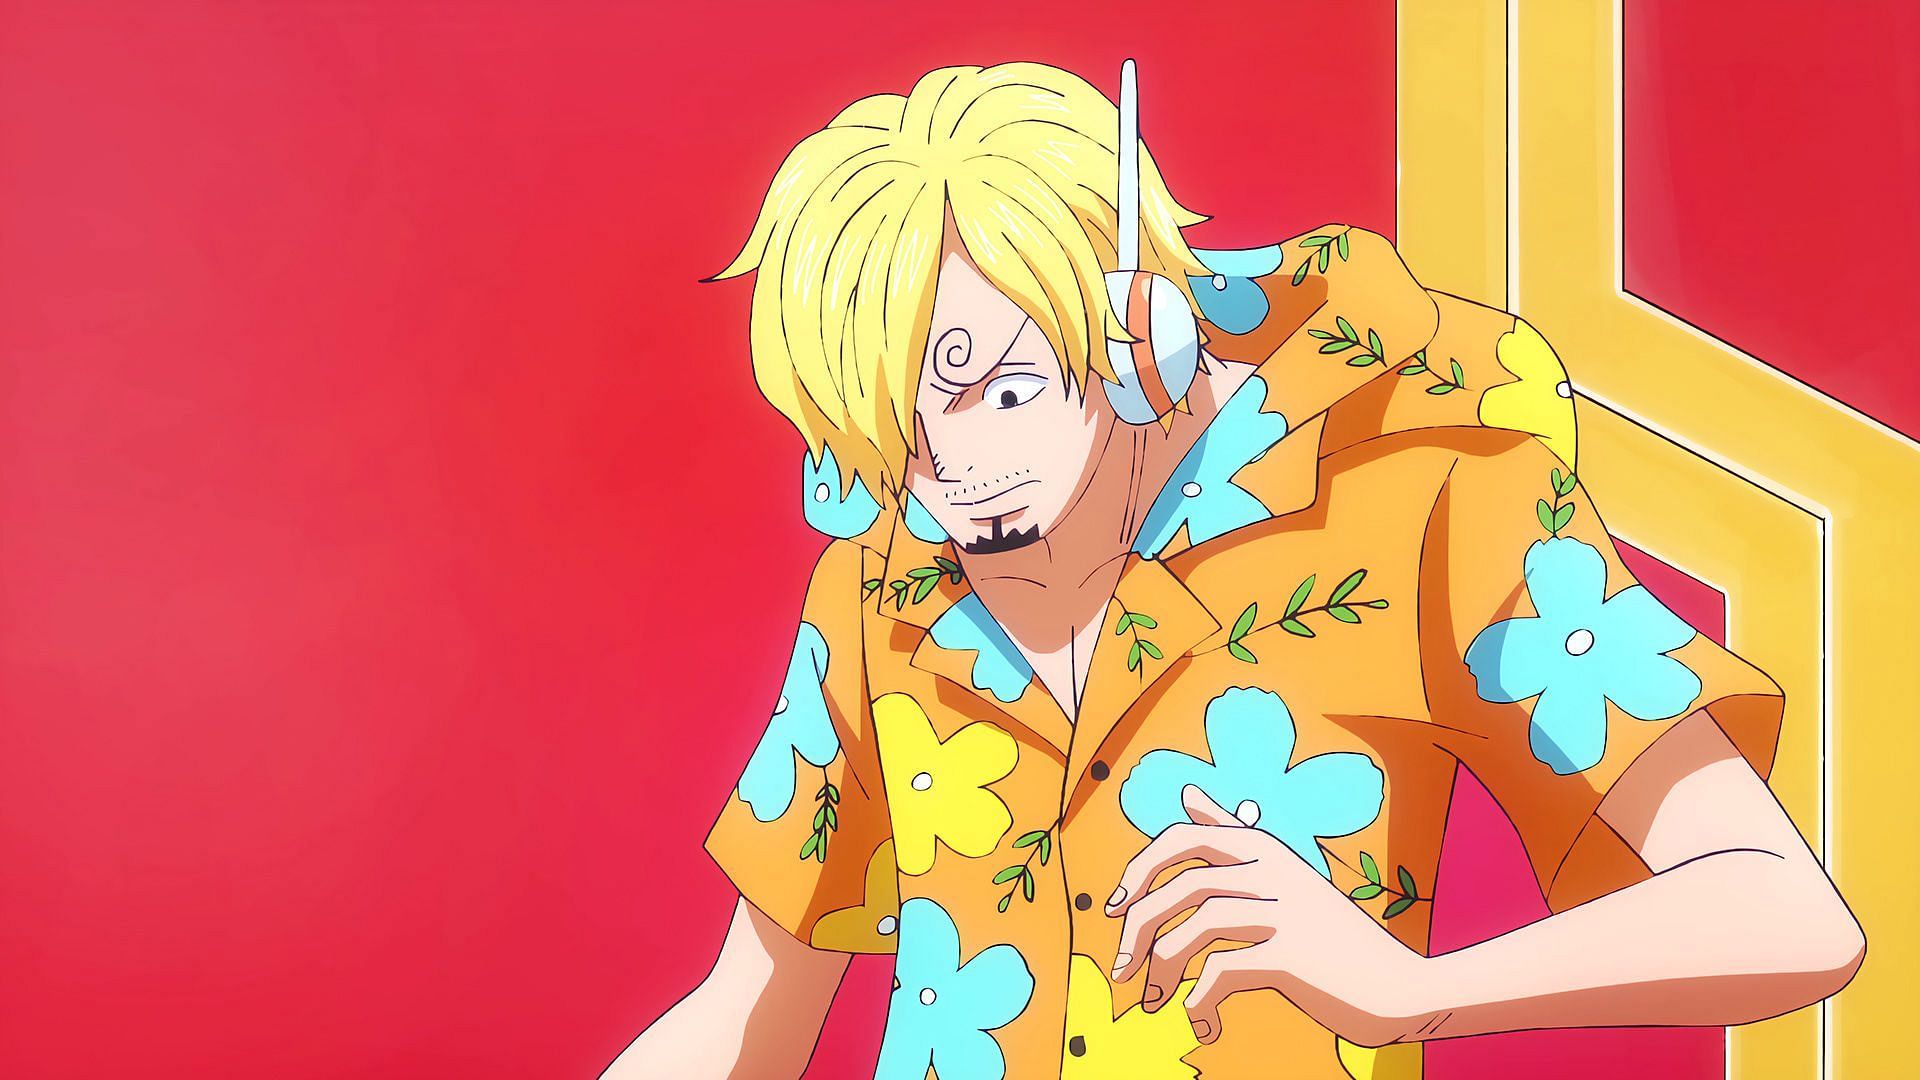 Sanji as seen in the One Piece anime (Image via Toei Animation)